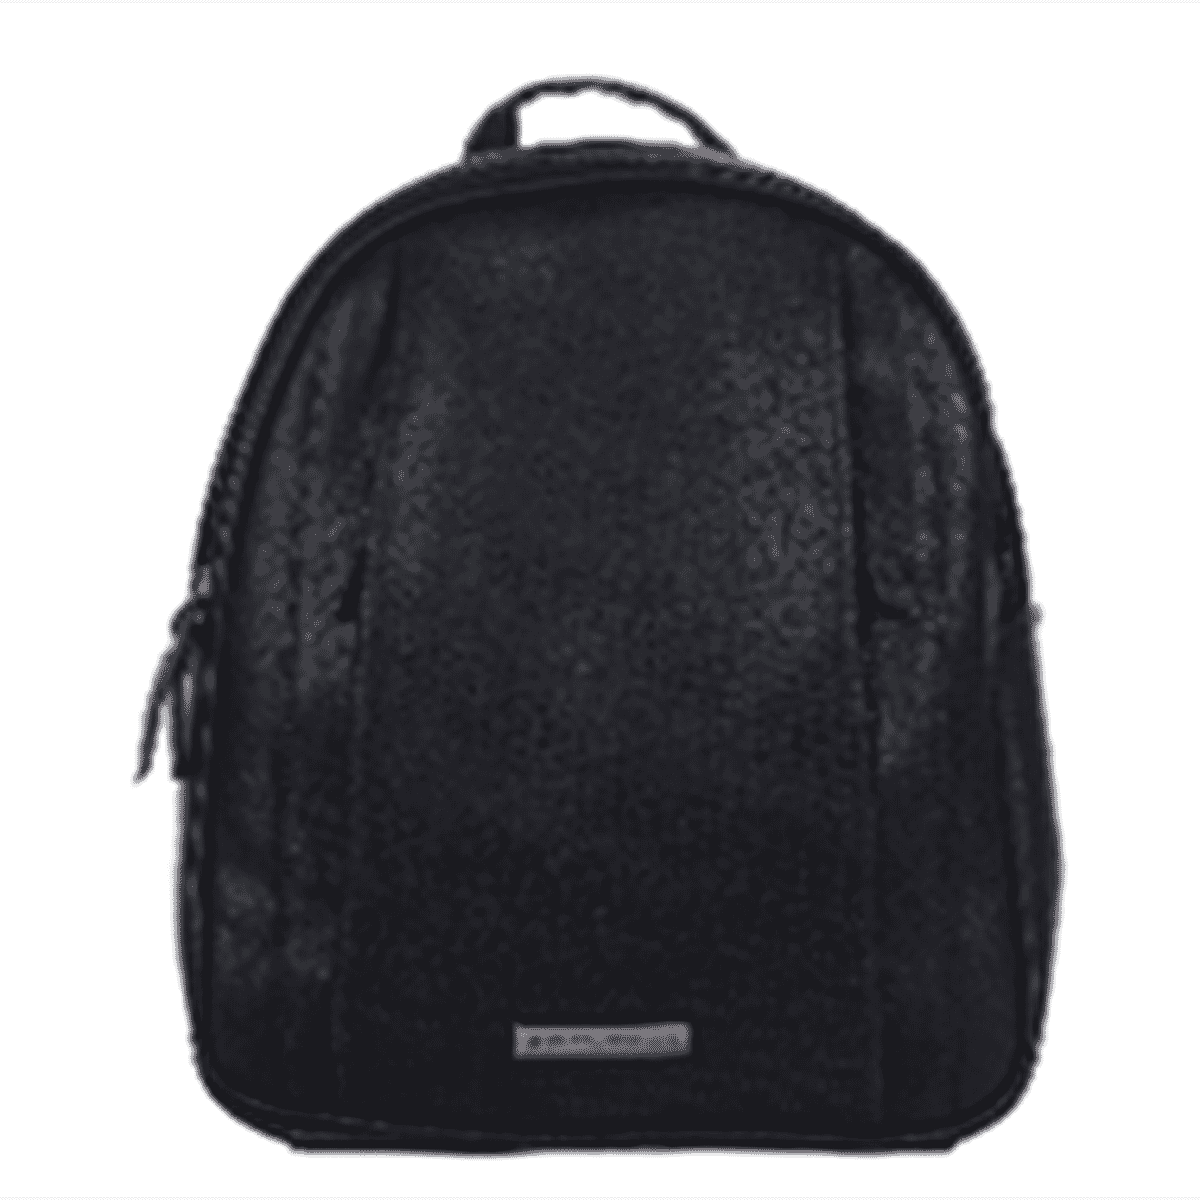 Leatherette Backpack with Zipped Pocket - Black